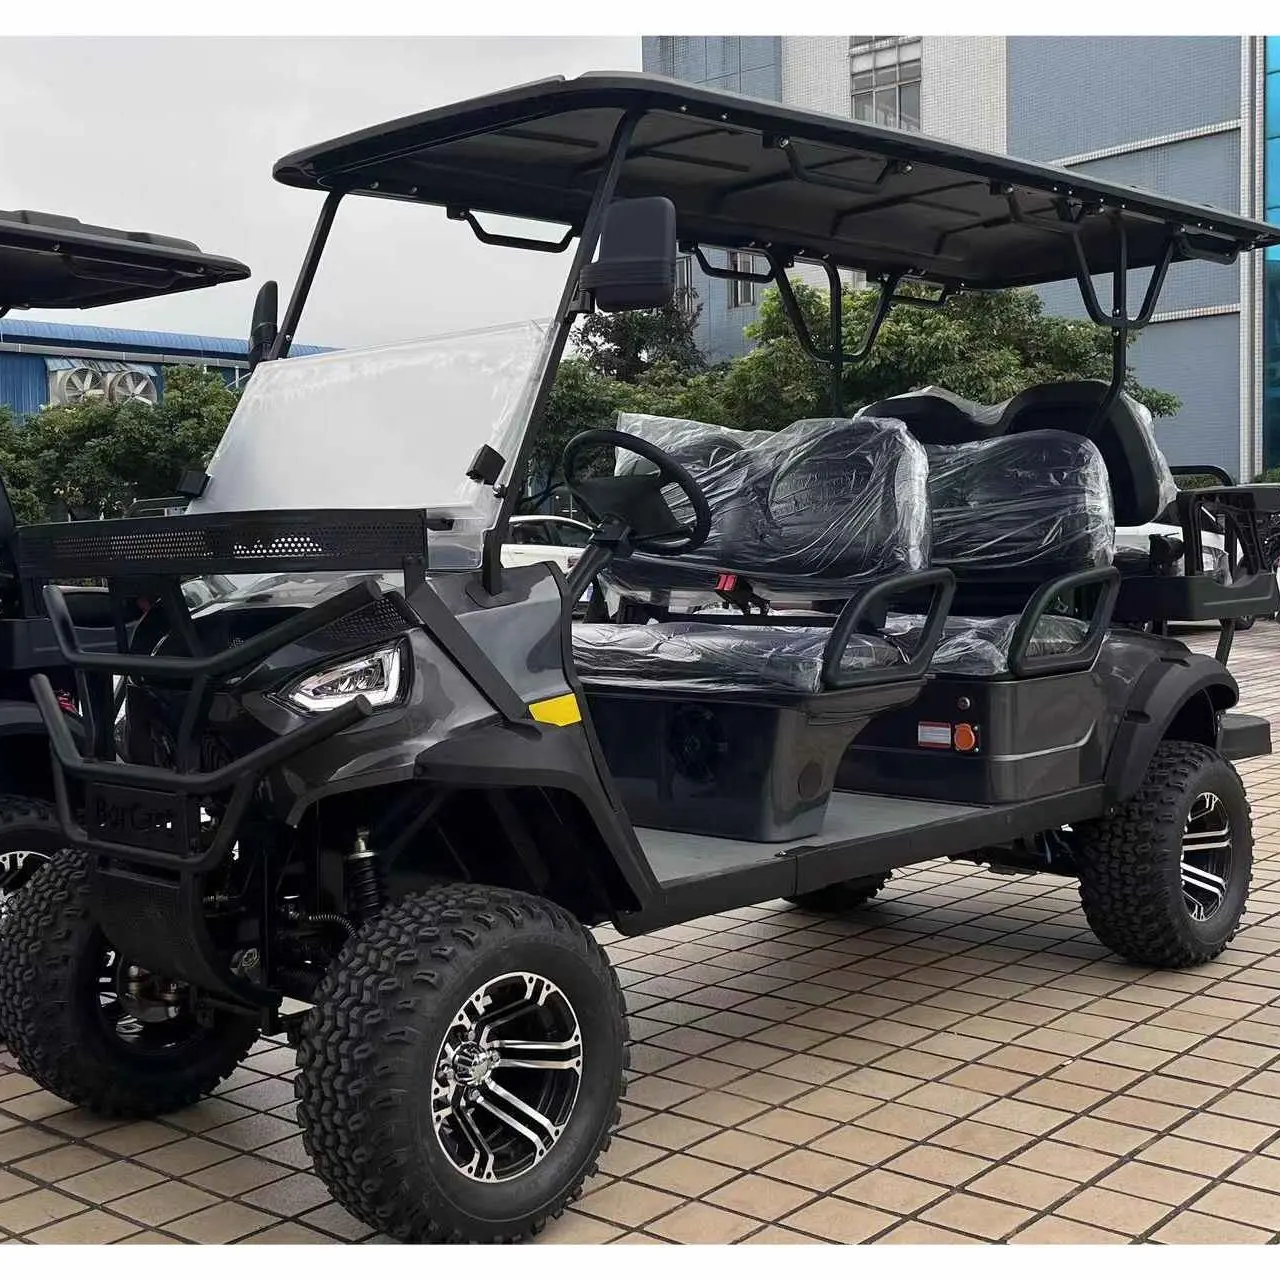 Custom Golf Cart 6 Seater Lifted Golf Carts Electric 4 Disc Brake System Independent Suspension Hunting Cart